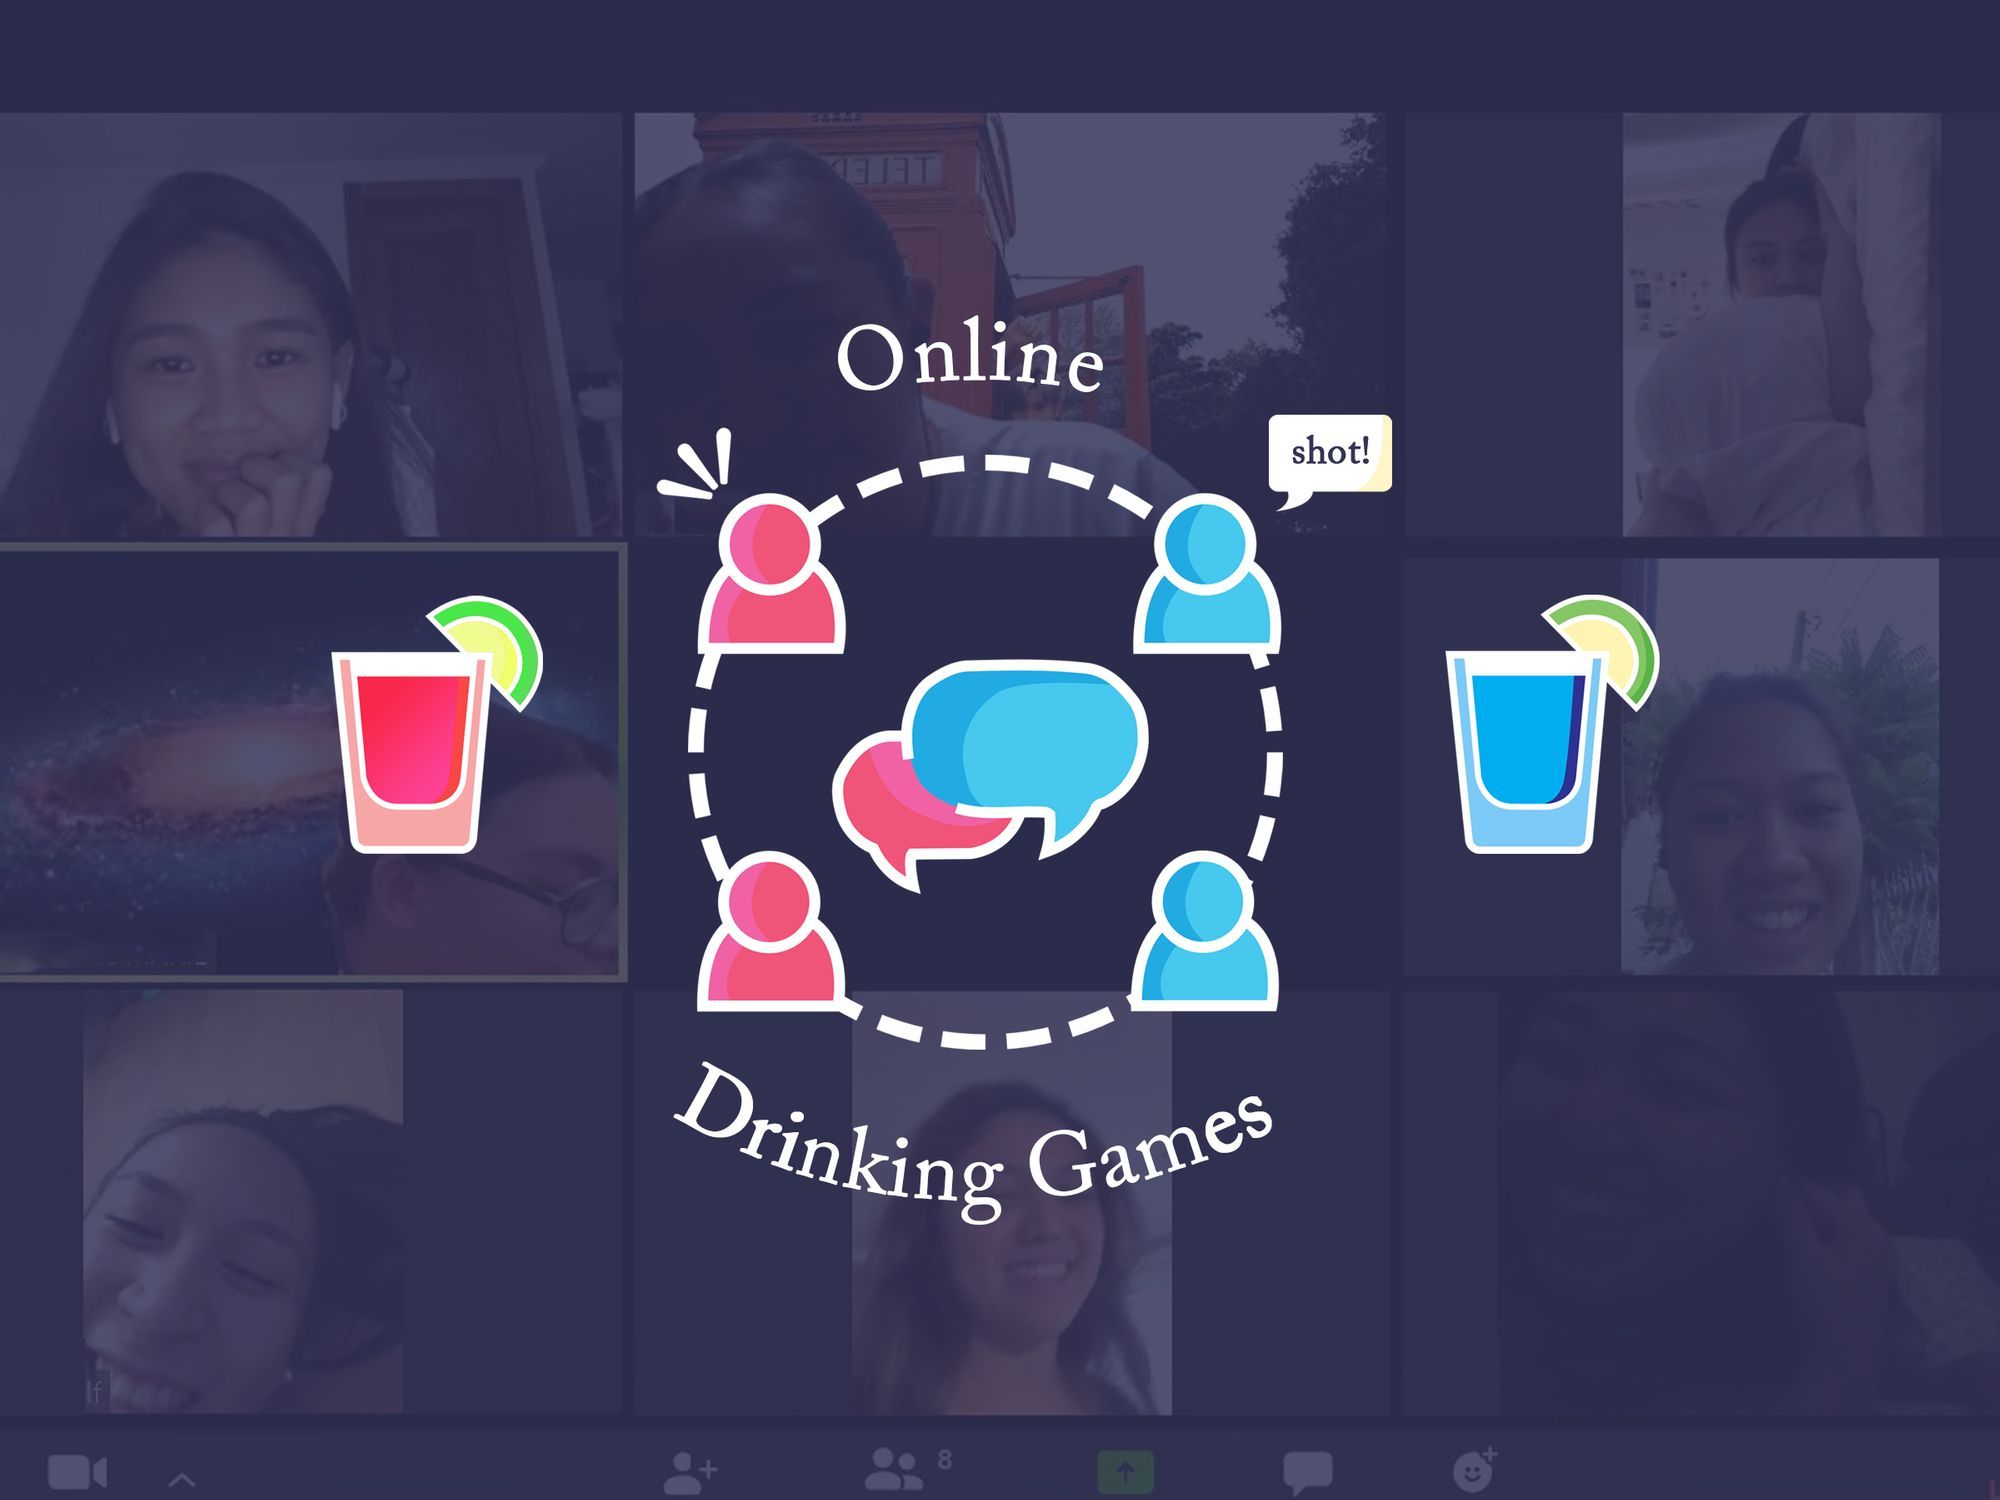 Bored? Play Skype Games With Your Friends